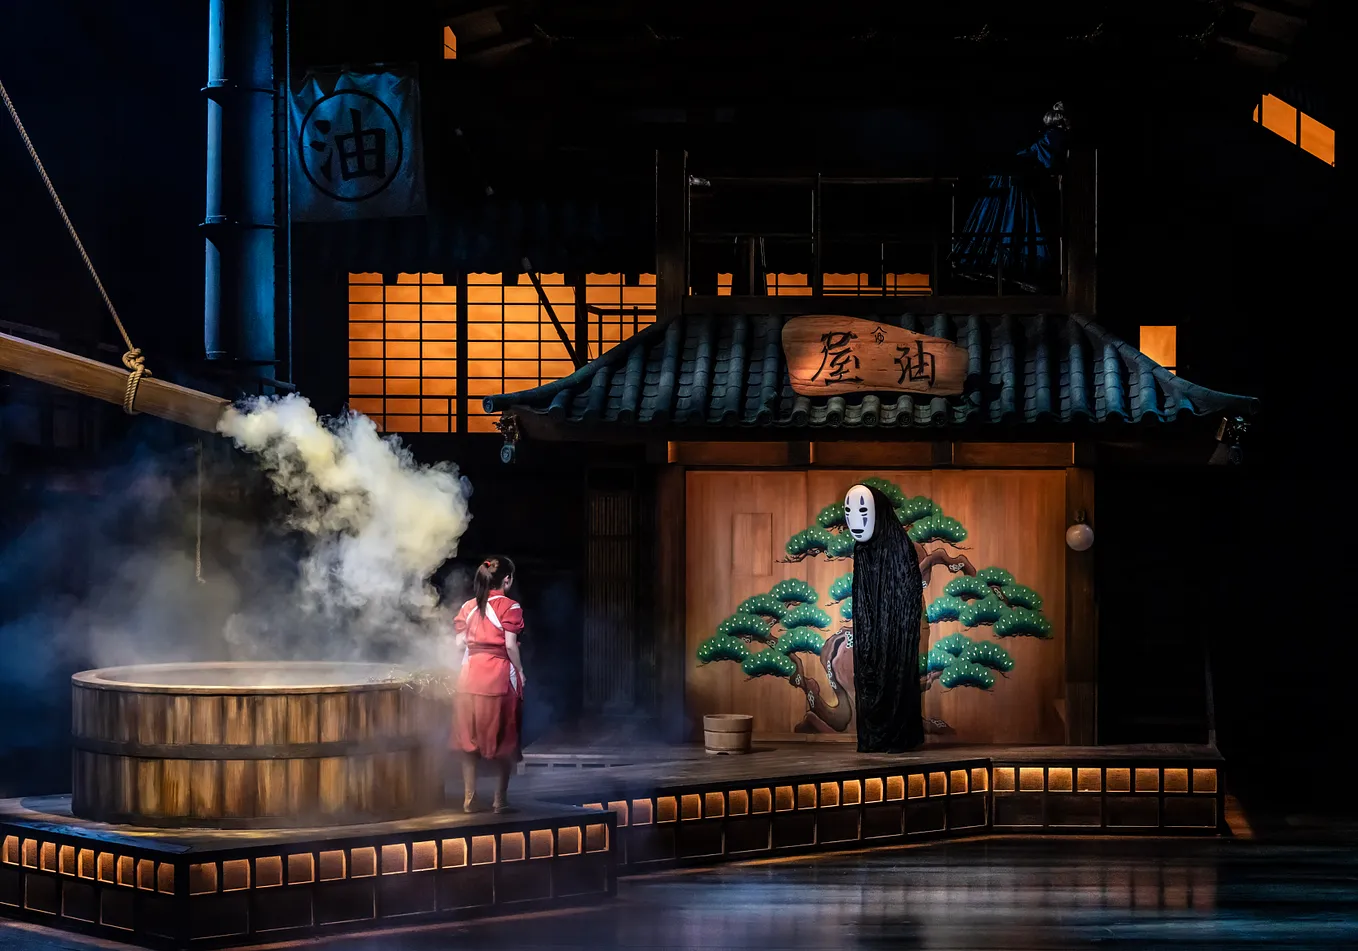 Chihiro (played by Kanna Hashimoto) faces off with No Face (played by Hikaru Yamano) in the bathhouse